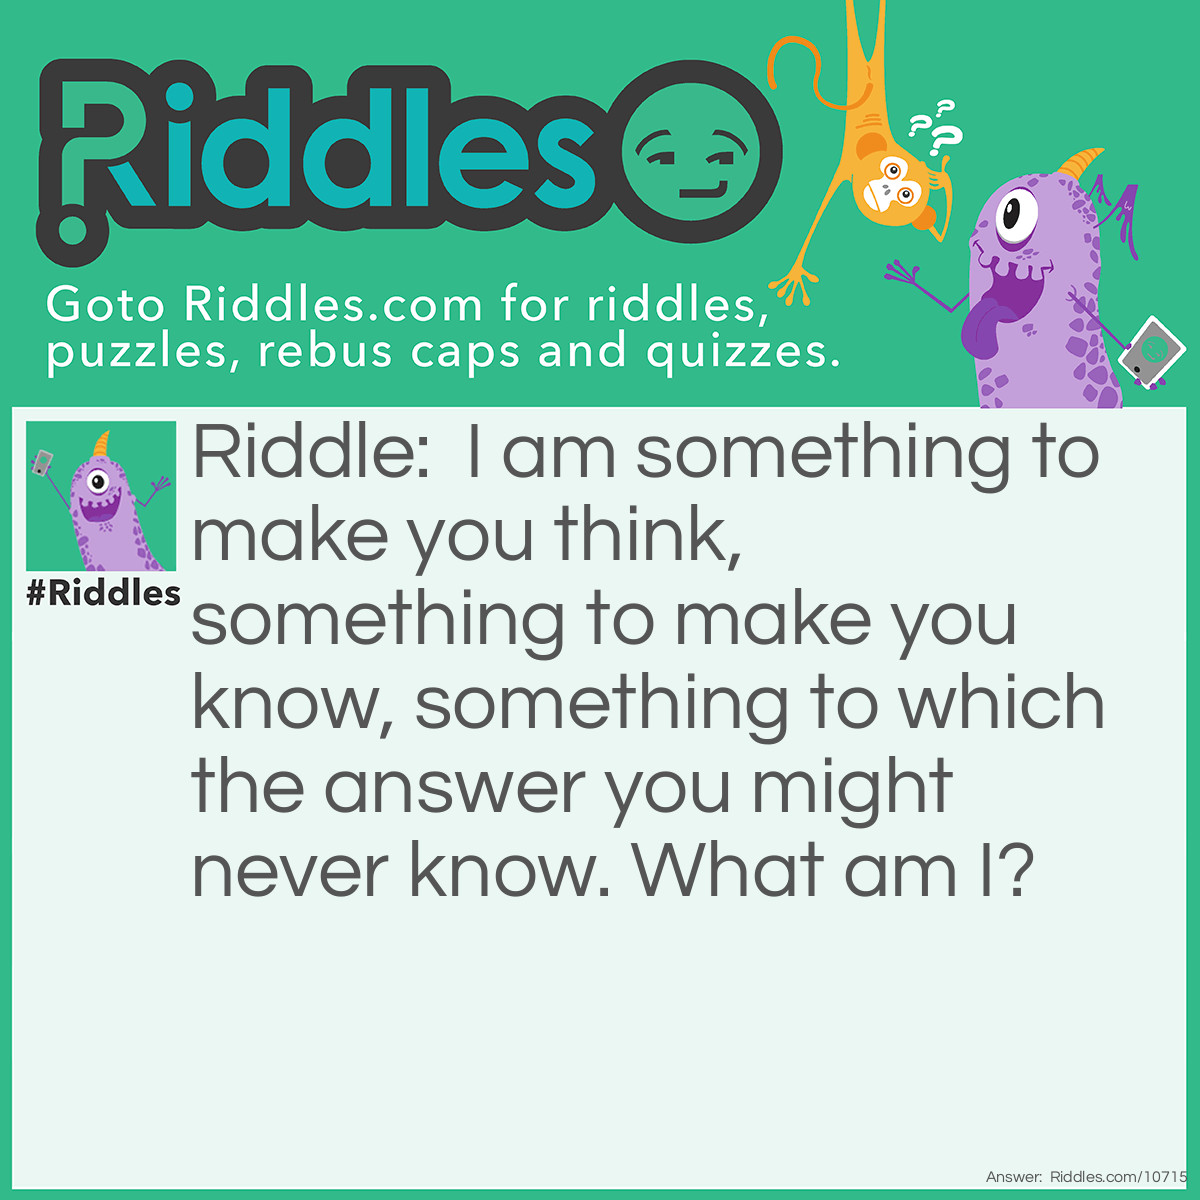 Riddle: I am something to make you think, something to make you know, something to which the answer you might never know. What am I? Answer: A riddle.